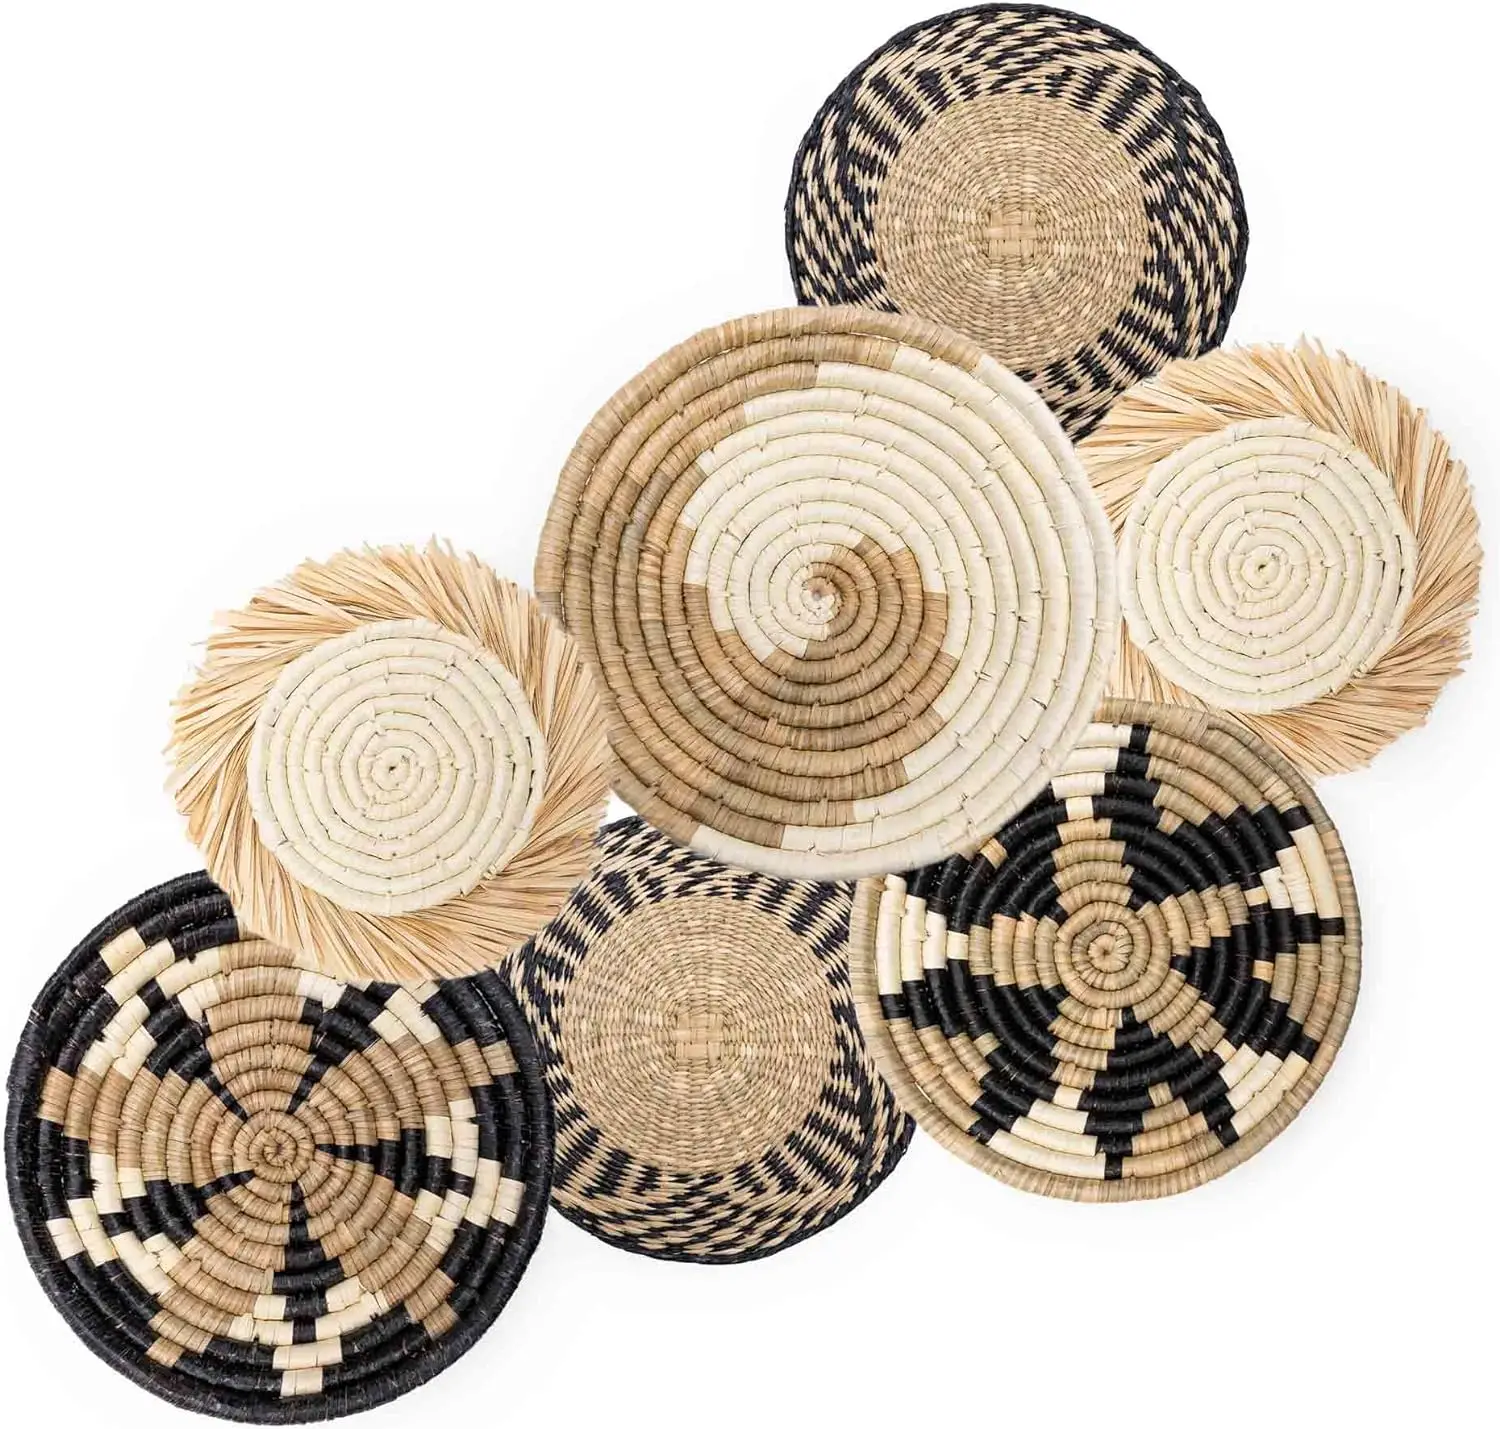 

Woven Wall Basket Set - 7 Unique Handcrafted Seagrass Baskets for , Farmhouse & Rustic Wall Decor, Table Settings & More